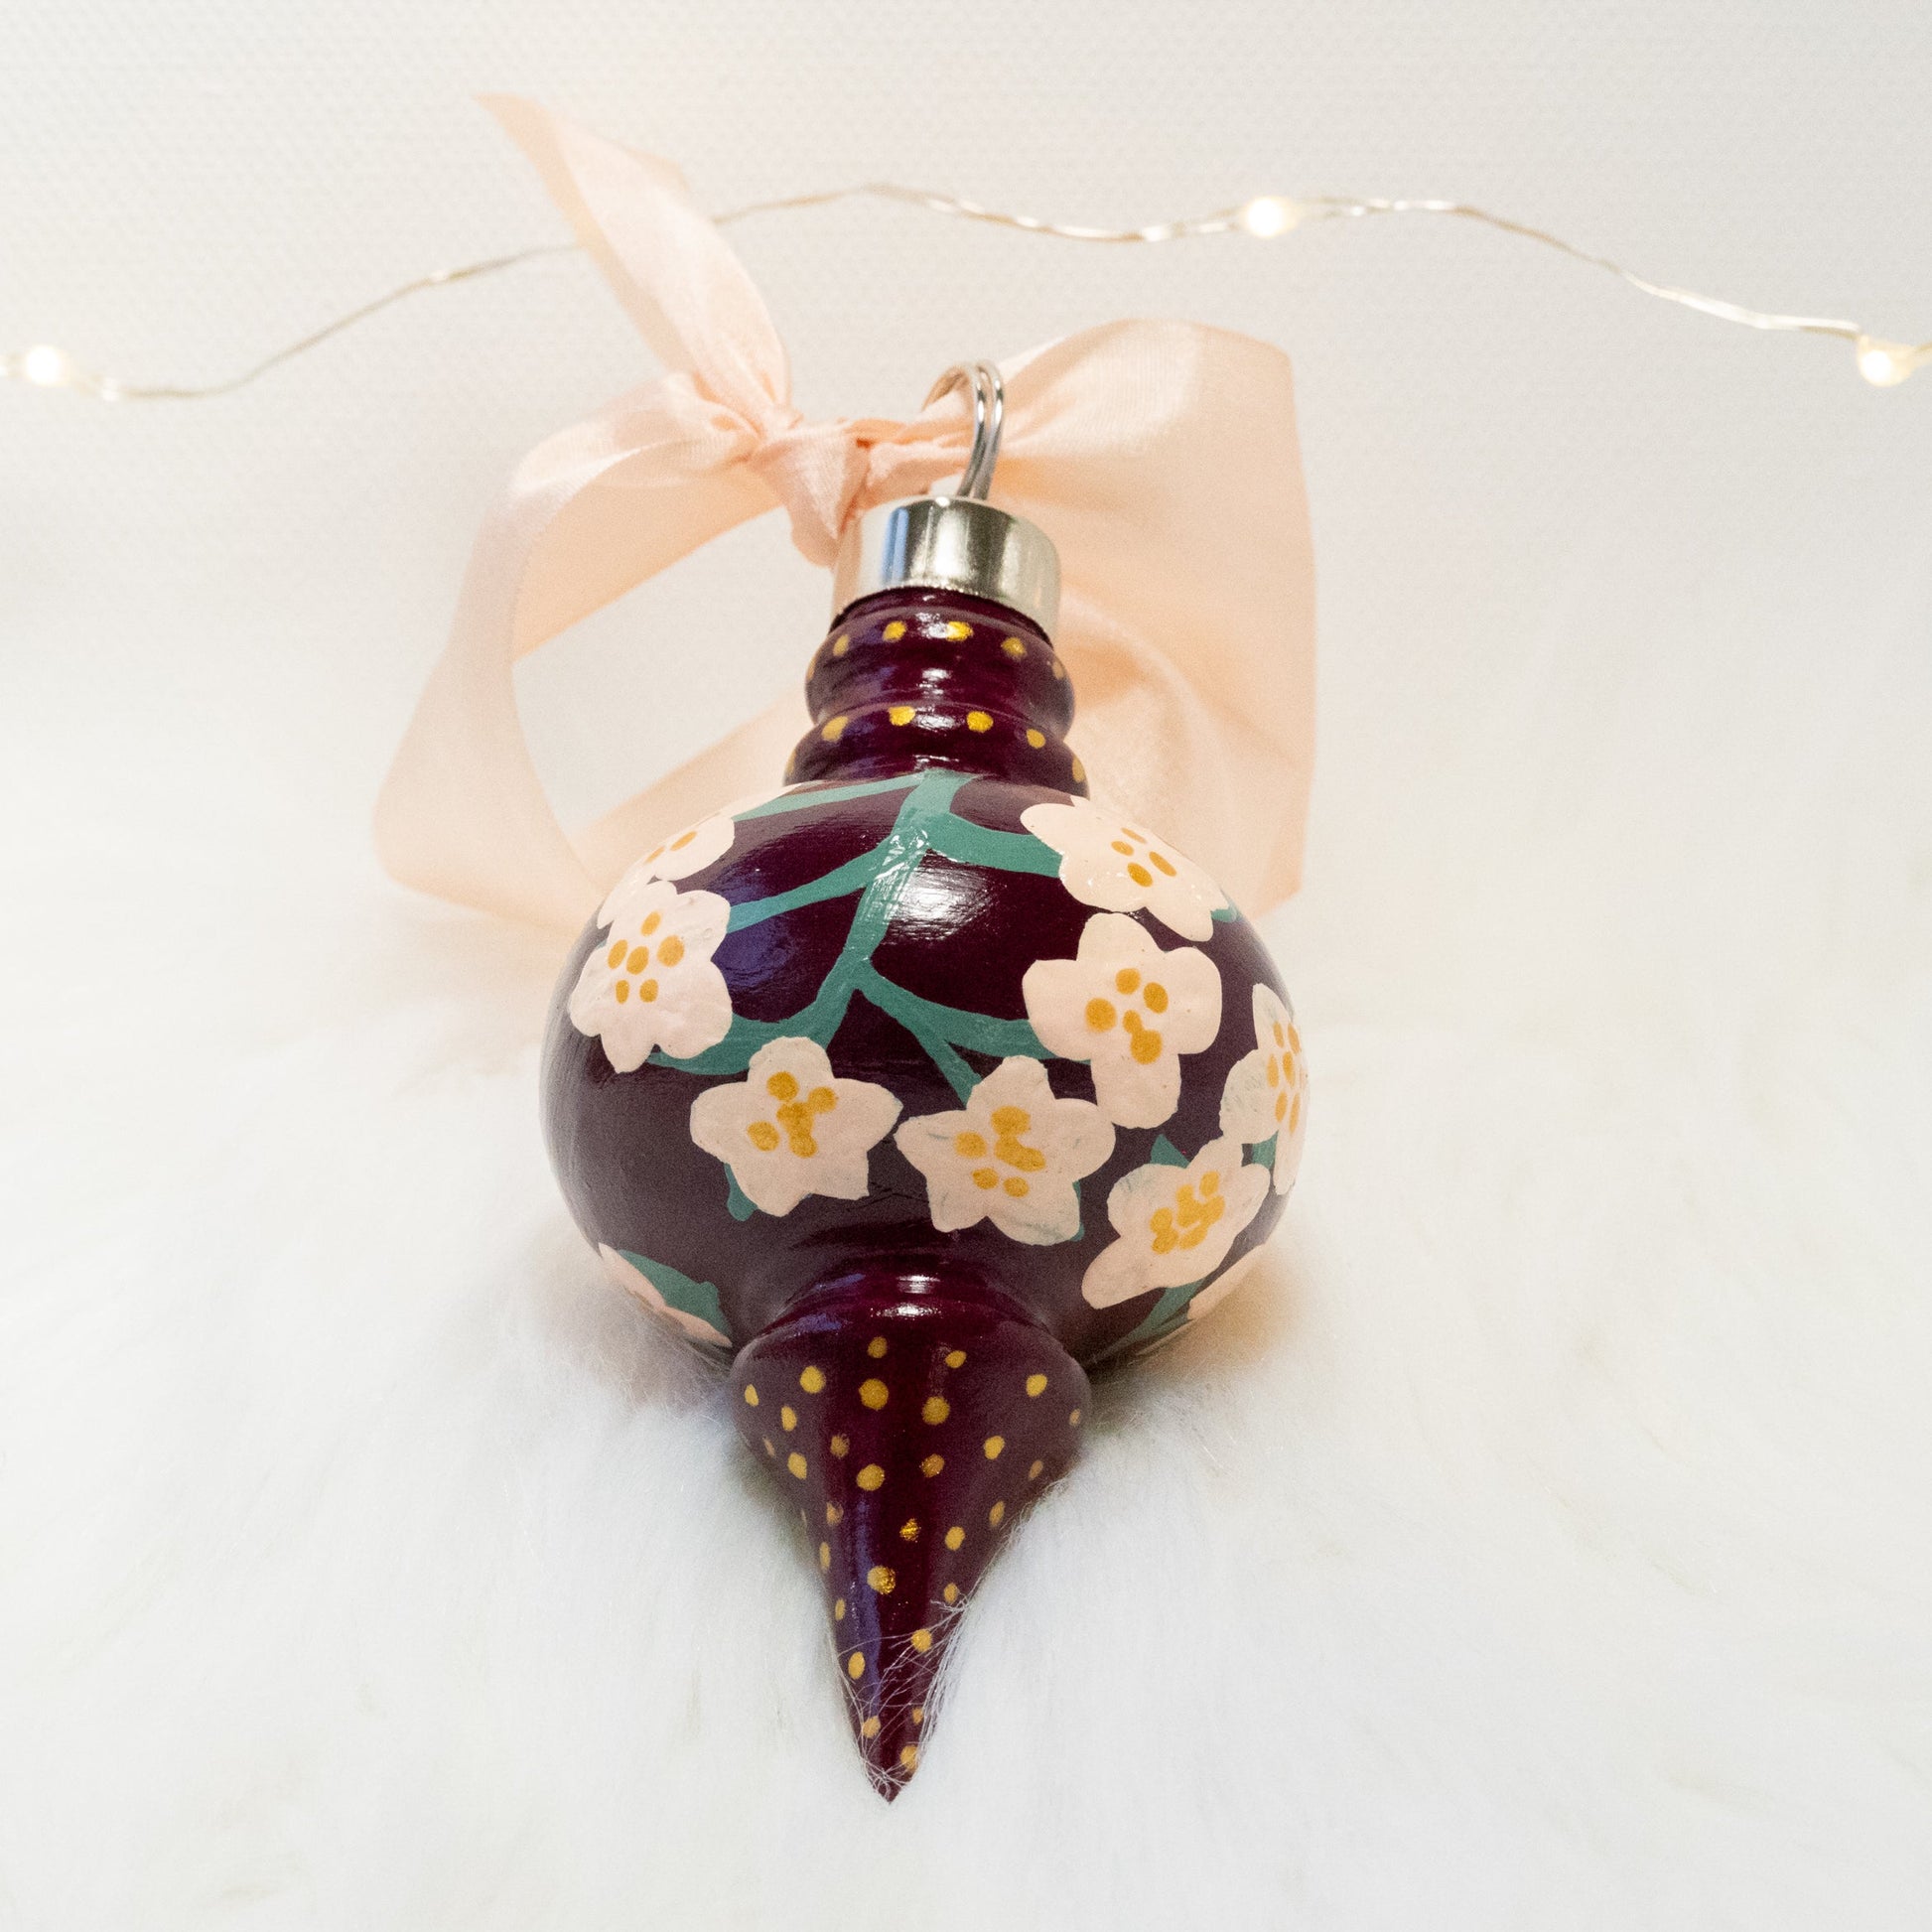 The Holly Hand Painted Ornament features a deep magenta base coat, light peach flowers with sage green stems and gold polka dots. Painted using fluid acrylic and acryla gouache paints. Displayed on white faux fur with fairy lights in the background.